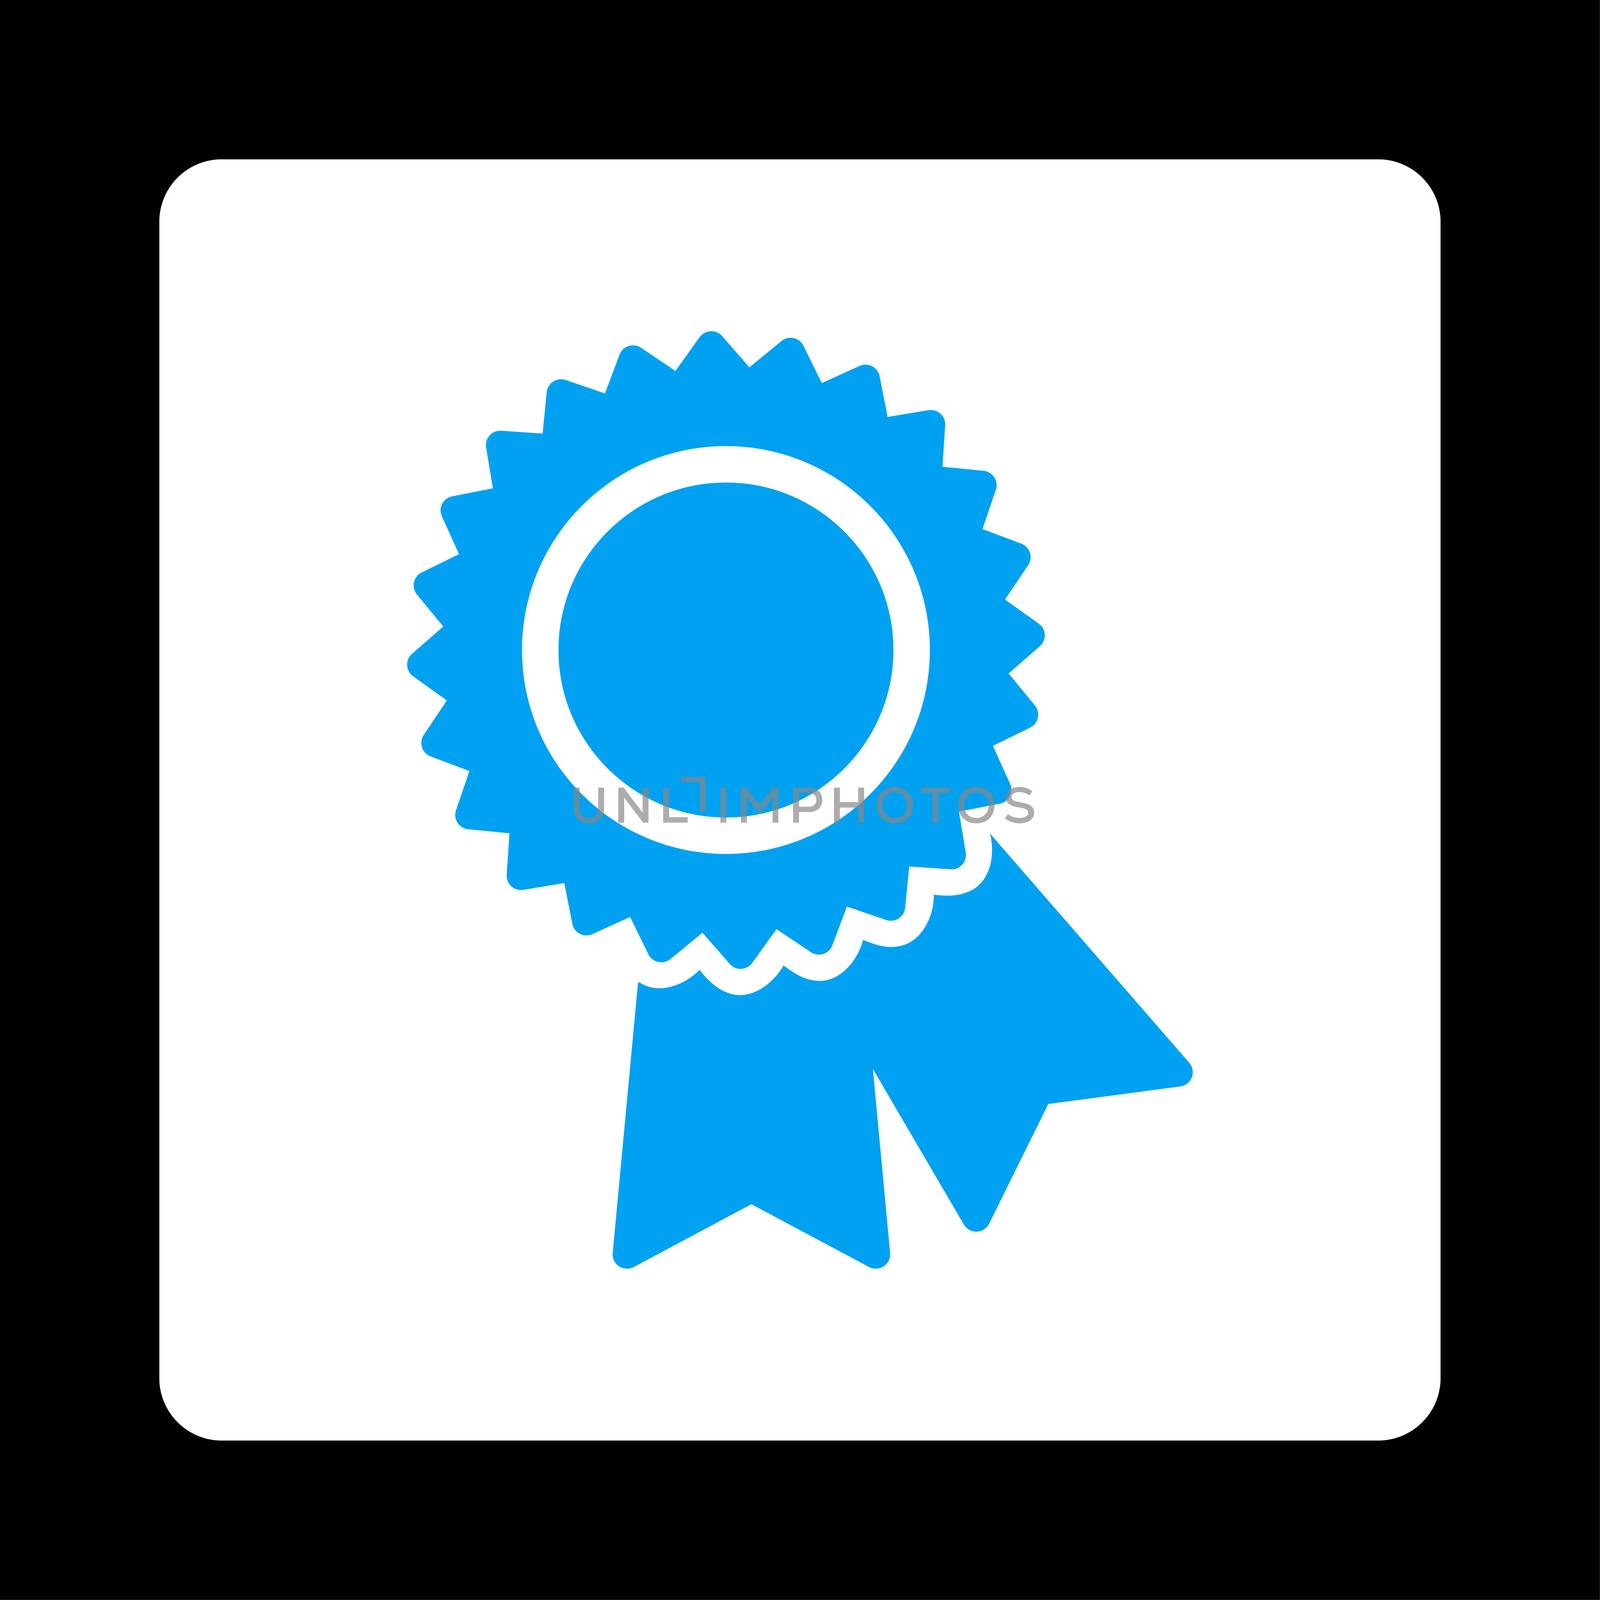 Certification icon from Award Buttons OverColor Set. Icon style is blue and white colors, flat rounded square button, black background.